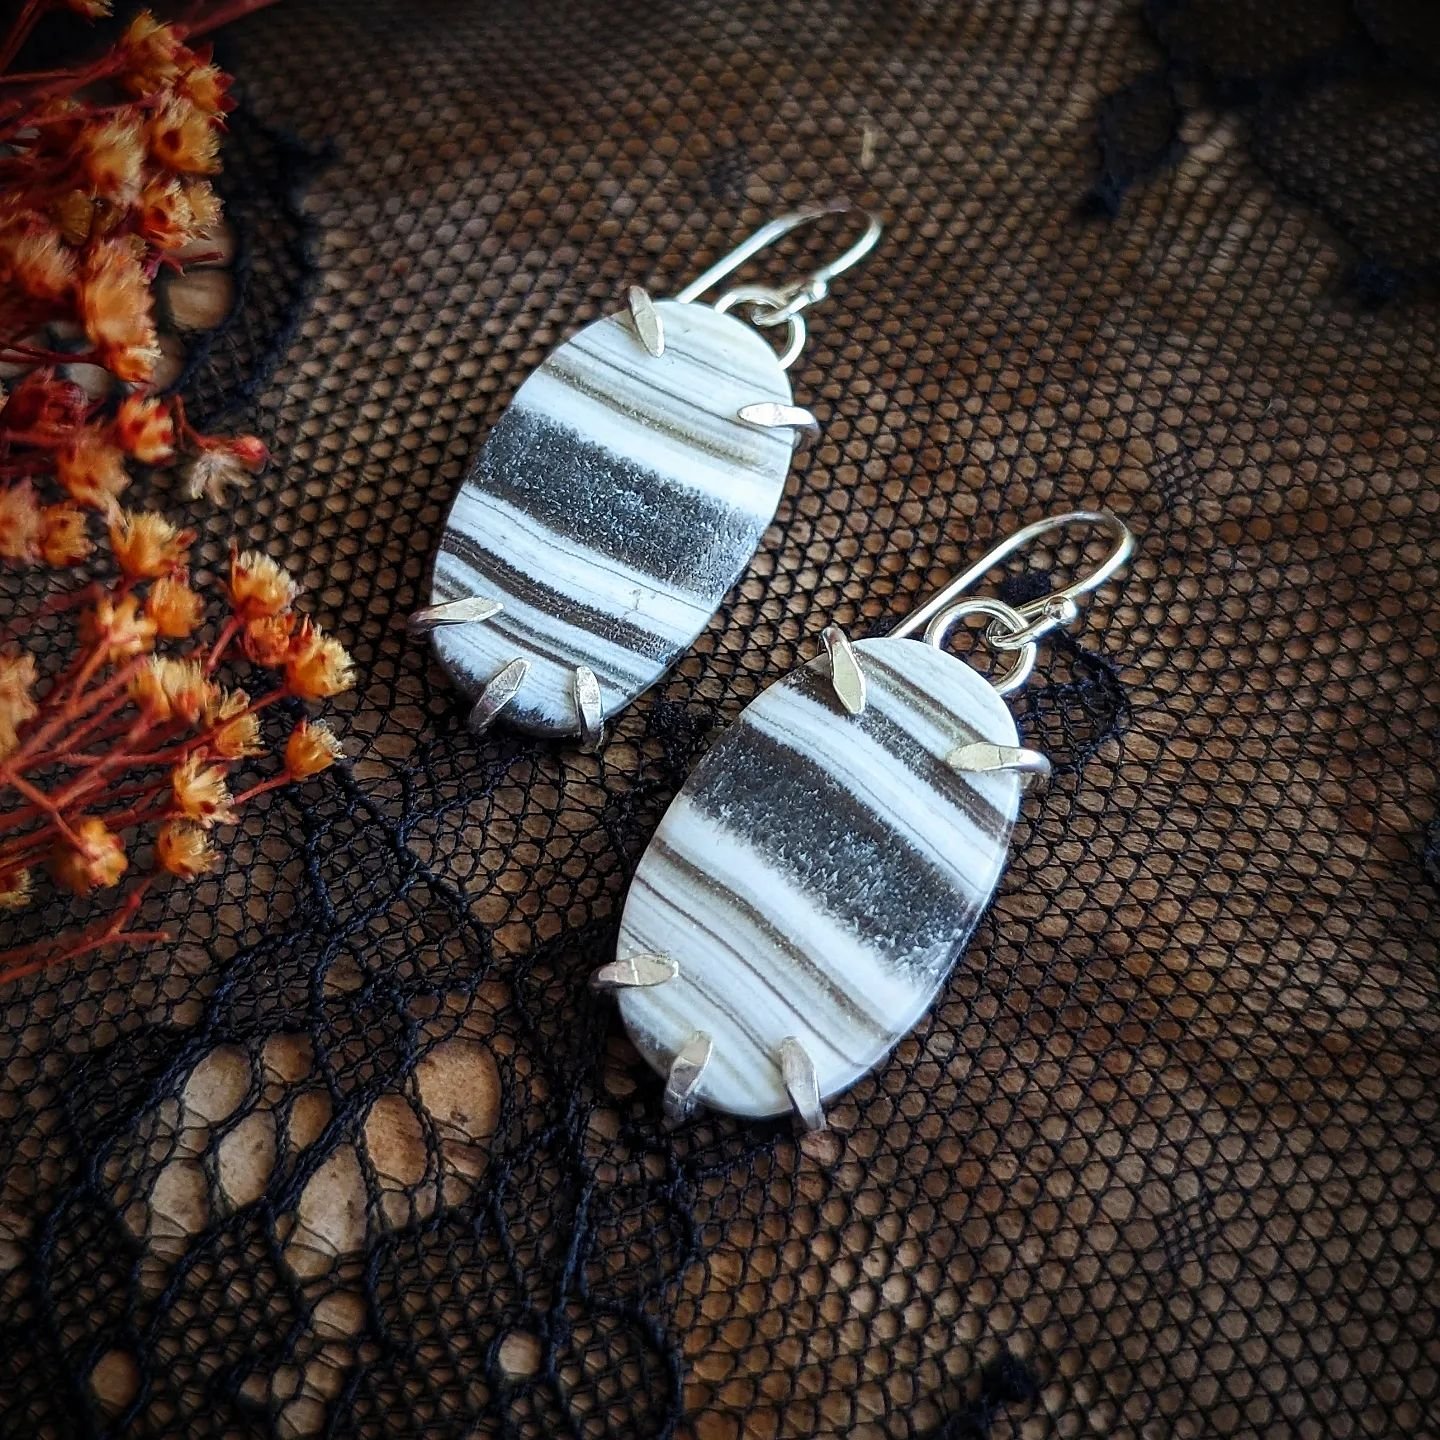 I've been leaning into more unique stones lately,. When I see something I haven't seen before, I'll add it to my collection and make some new OOAK pieces for you! 
🦓🦓🦓🦓
These earrings are made with Zebra Calcite, which can help to improve physica